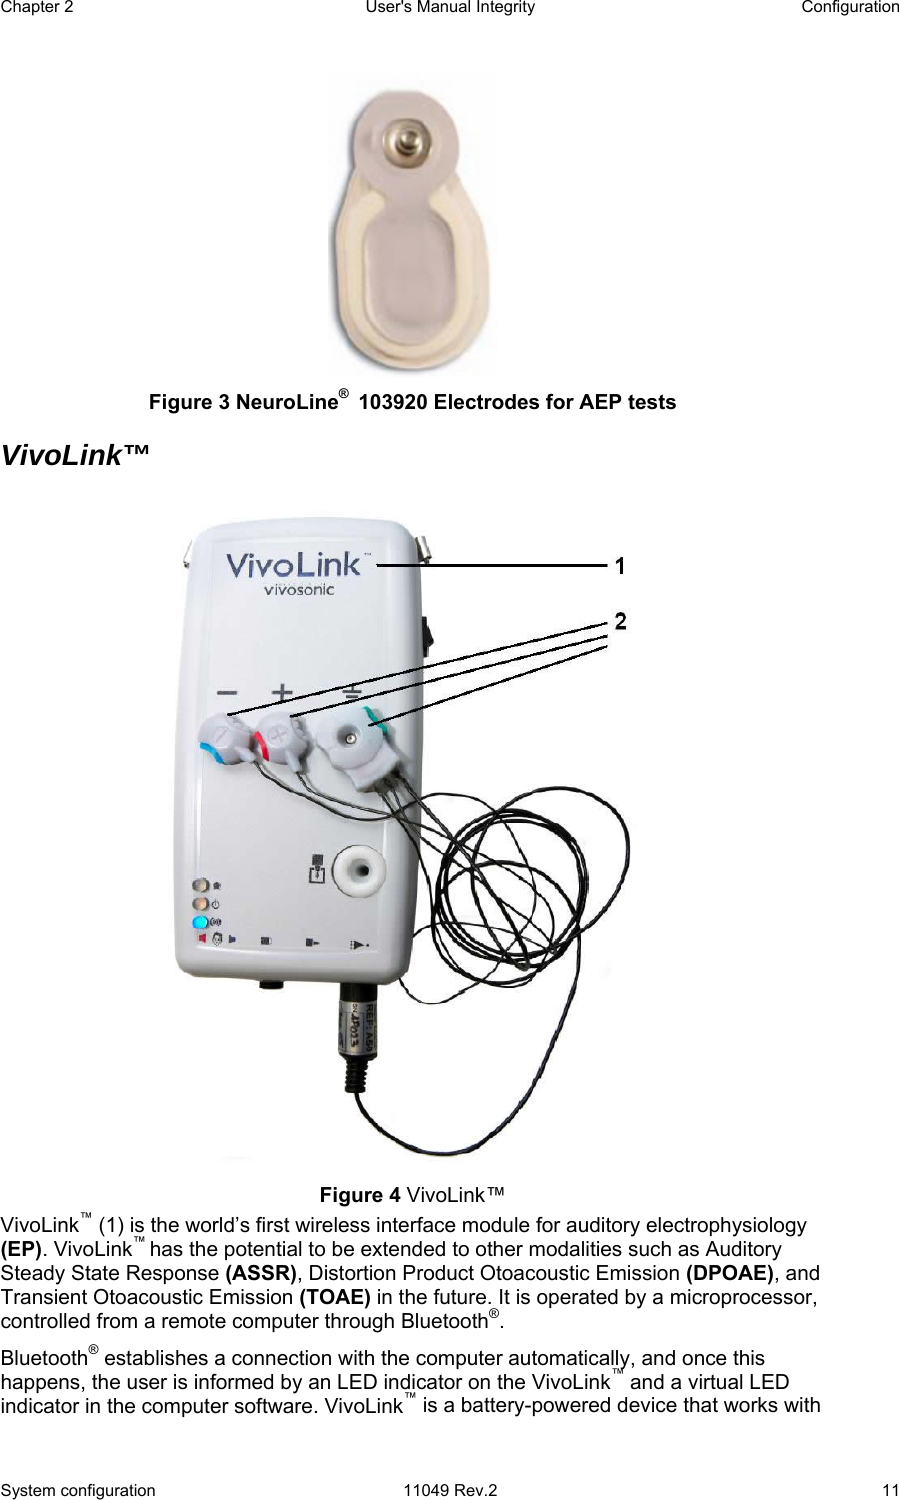 Chapter 2  User&apos;s Manual Integrity  Configuration System configuration  11049 Rev.2  11  Figure 3 NeuroLine®  103920 Electrodes for AEP tests VivoLink™  Figure 4 VivoLink™ VivoLink™ (1) is the world’s first wireless interface module for auditory electrophysiology (EP). VivoLink™ has the potential to be extended to other modalities such as Auditory Steady State Response (ASSR), Distortion Product Otoacoustic Emission (DPOAE), and Transient Otoacoustic Emission (TOAE) in the future. It is operated by a microprocessor, controlled from a remote computer through Bluetooth®.  Bluetooth® establishes a connection with the computer automatically, and once this happens, the user is informed by an LED indicator on the VivoLink™ and a virtual LED indicator in the computer software. VivoLink™ is a battery-powered device that works with 